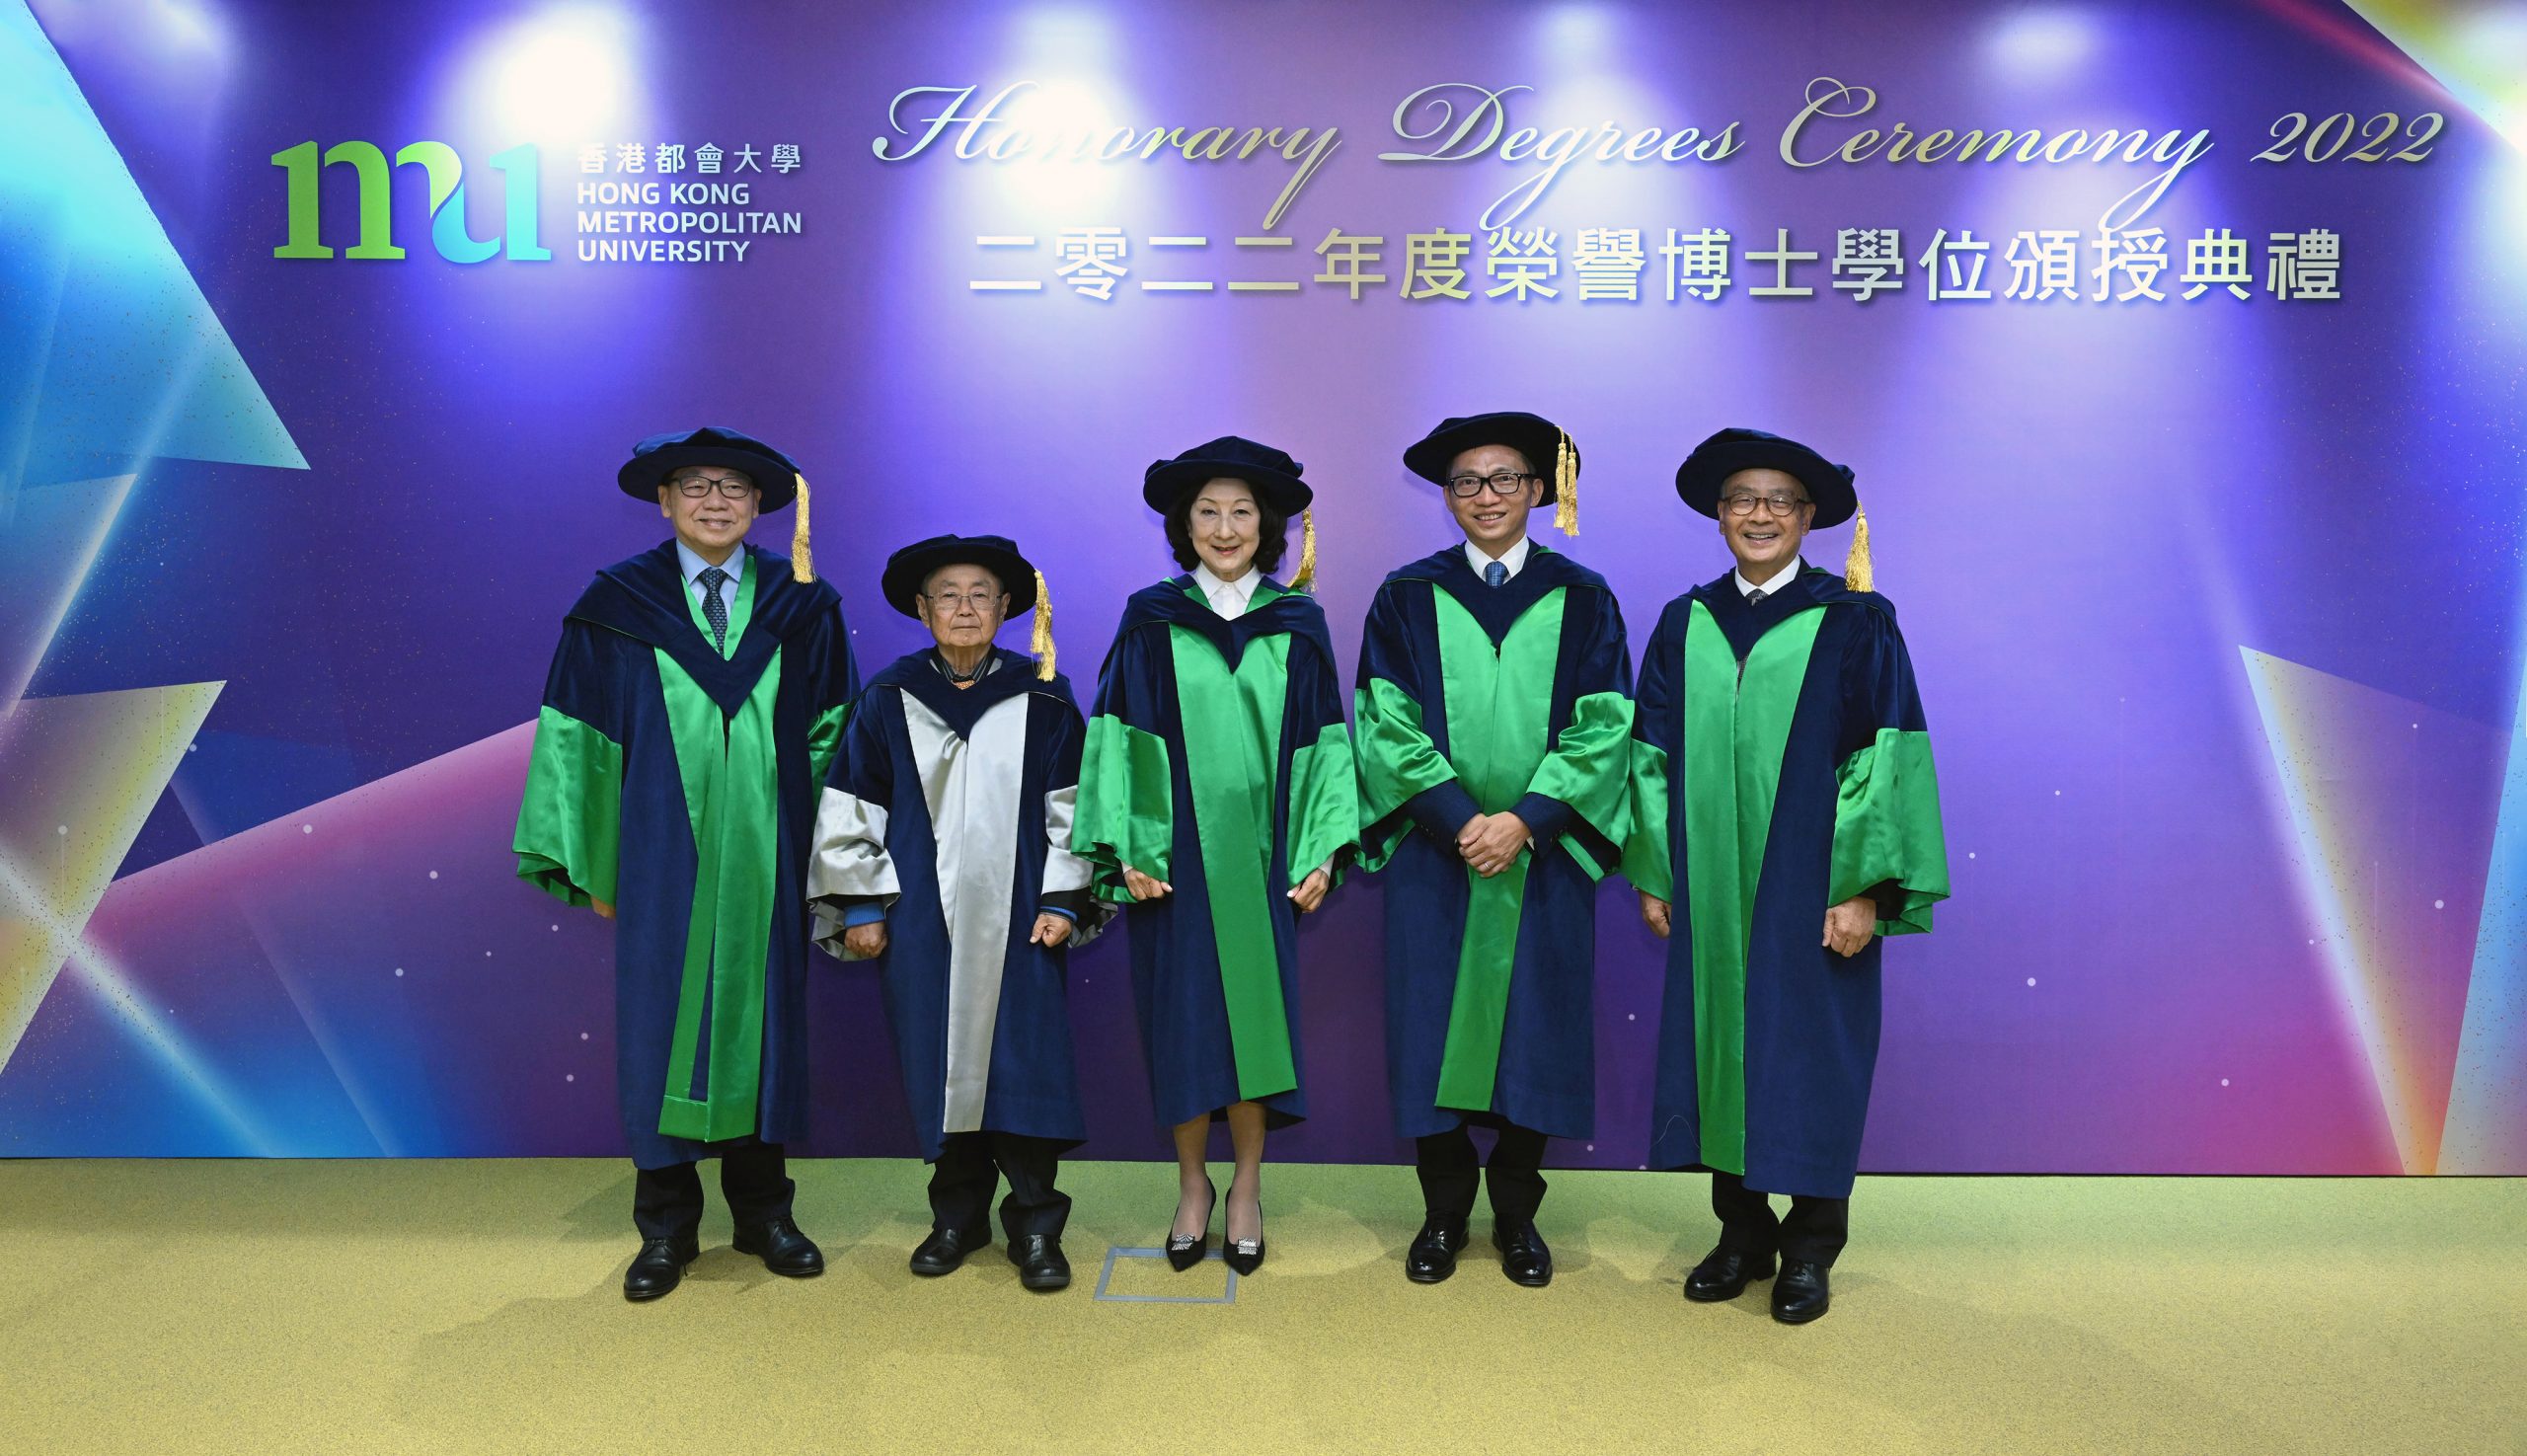 Five Honorary Doctorate recipients (from left): Mr Peter Wan Kam-to, Prof. Joseph Ting Sun-pao, Ms Katie Shu Sui-pui, Dr Charles Chen Yidan, and Mr Chan Ka-kui.